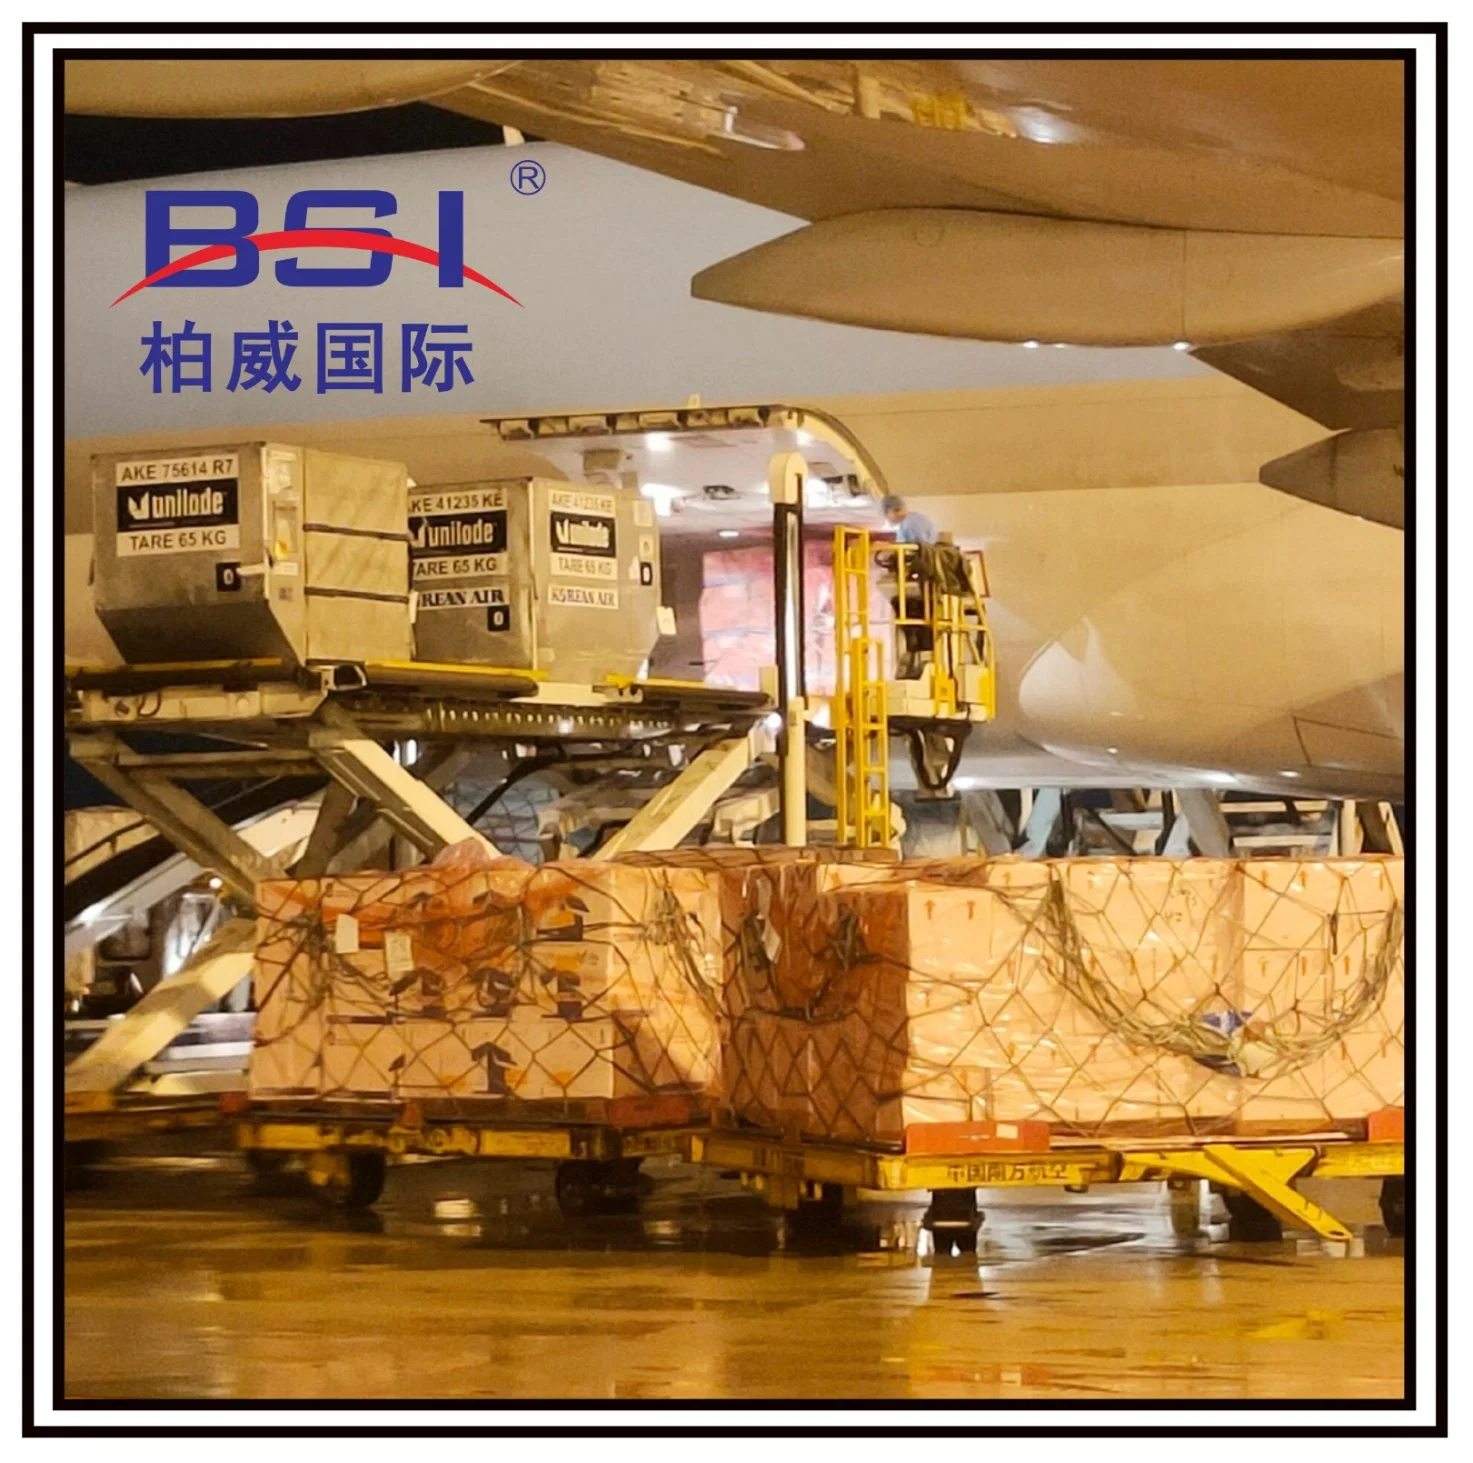 1688 Fast and Cheap Air/Sea Freight Transportation Loistics Shipping and Freight Forwarding Services From China to The Netherlands, Paris, Nigeria, The United S